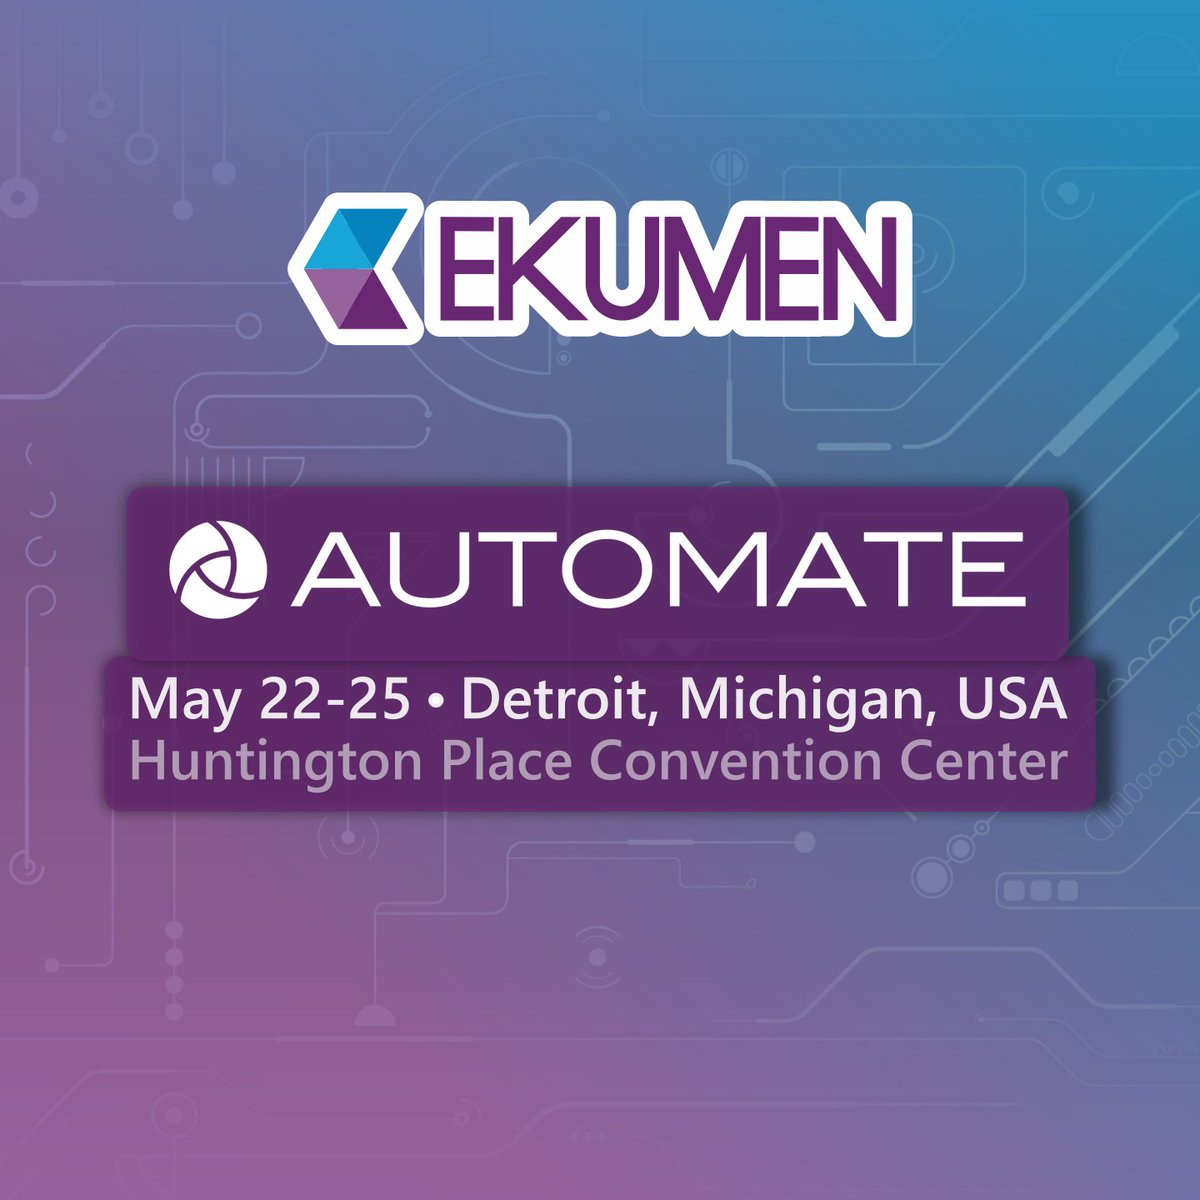 Our team we'll be participating in the 2023 #AutomateConference, where we'll be showcasing our cutting-edge #robotics and #extendedreality software solutions. 🤖🌟

Feel free to contact us through email at contact@ekumenlabs.com. 📩

#Automate2023 #Robotics #AR #VR #Innovation